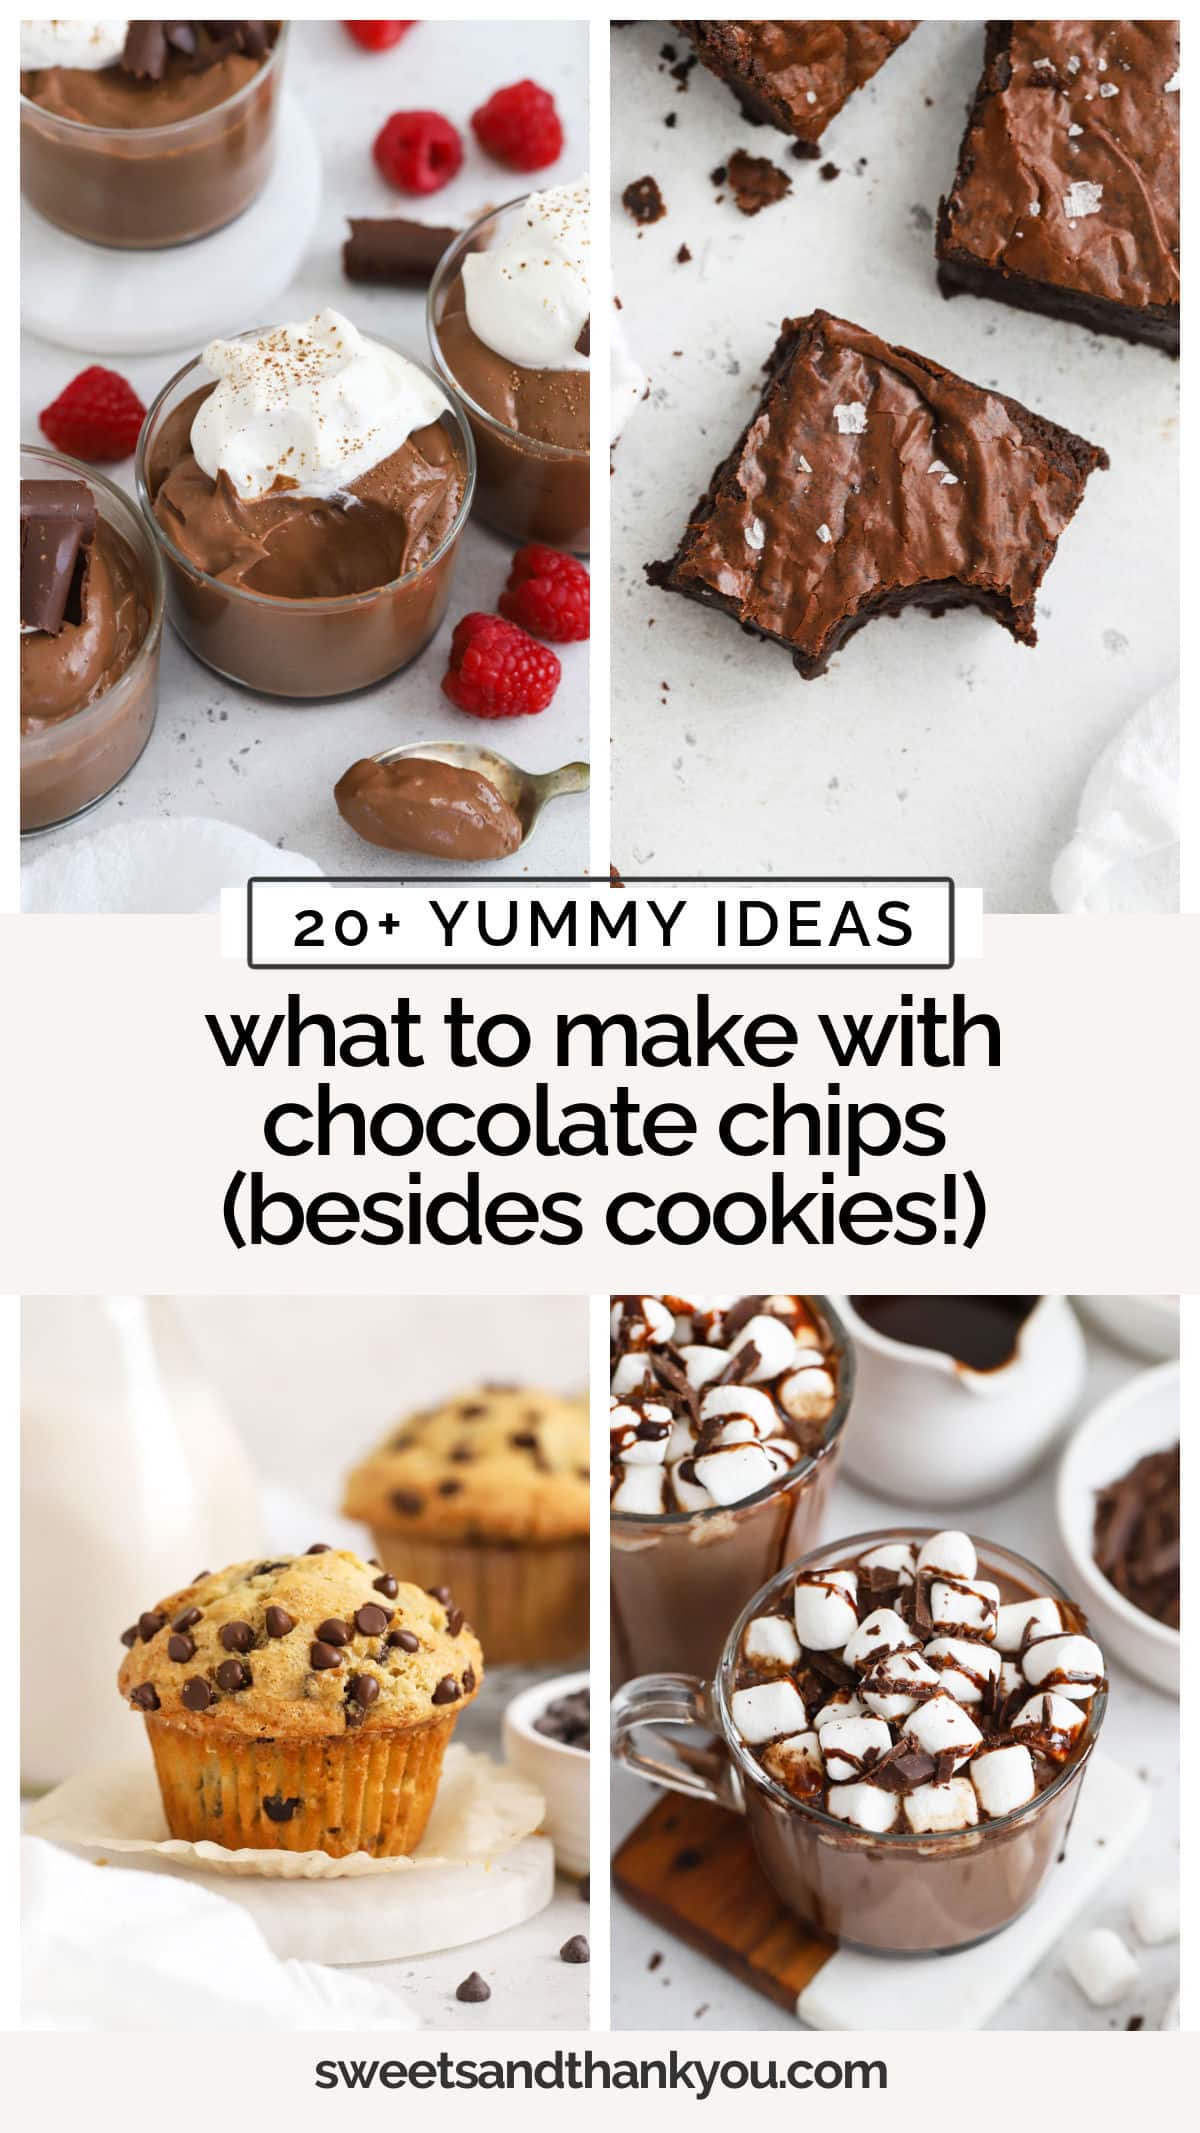 Have some chocolate chips on hand you need to use up? Here are 20+ recipes to make with chocolate chips besides cookies (though we also have some chocolate chip cookie, recipes, too!) These are great recipes to use chocolate chips and break out of a baking rut. From brownies and bars, to ice cream toppings, muffins, pudding, and more, there's a recipe for every occasion!